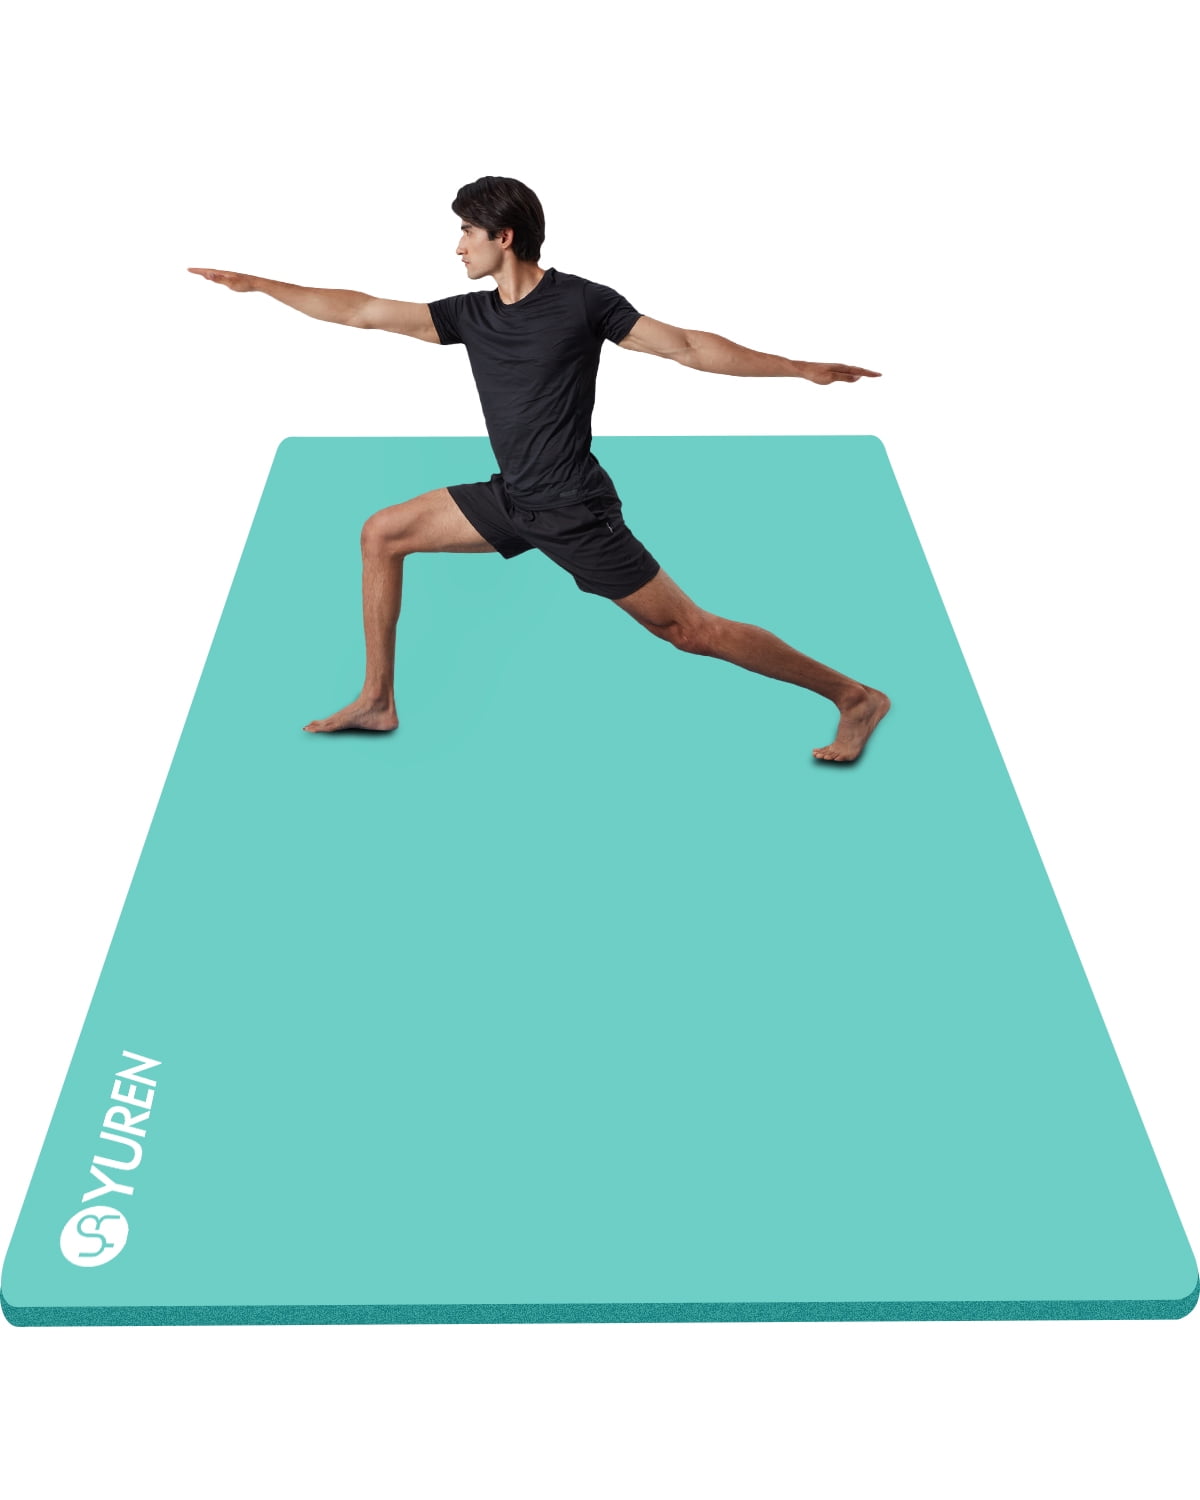 YR Workout Mat for Home Gym 6'x4' Large 1/2 Thick Foam Floor Exercise Matt  Yoga Cardio IceBlue 